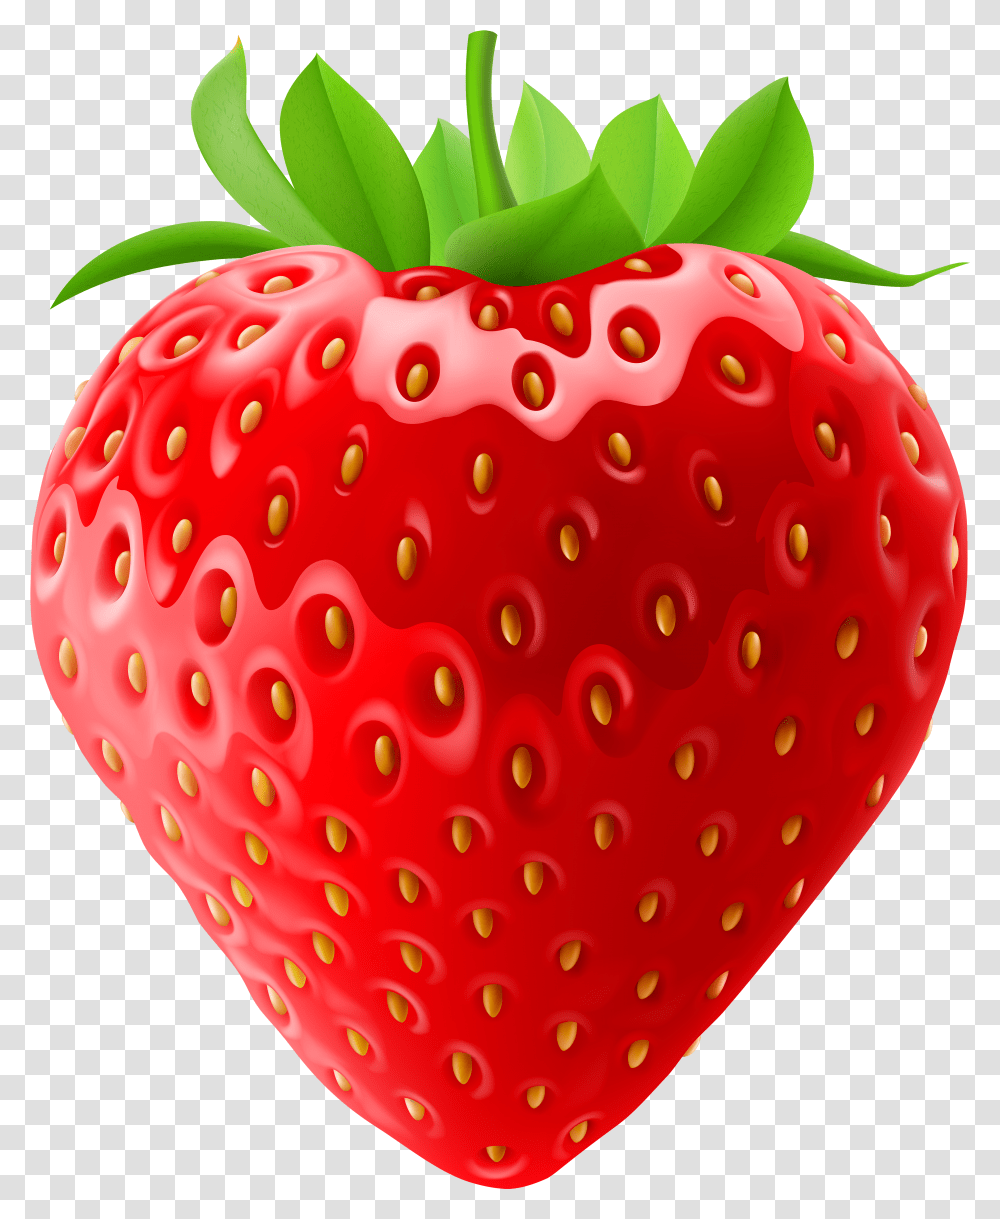 Strawberry Fruit Clipart Background Strawberry Clipart Transparent Png